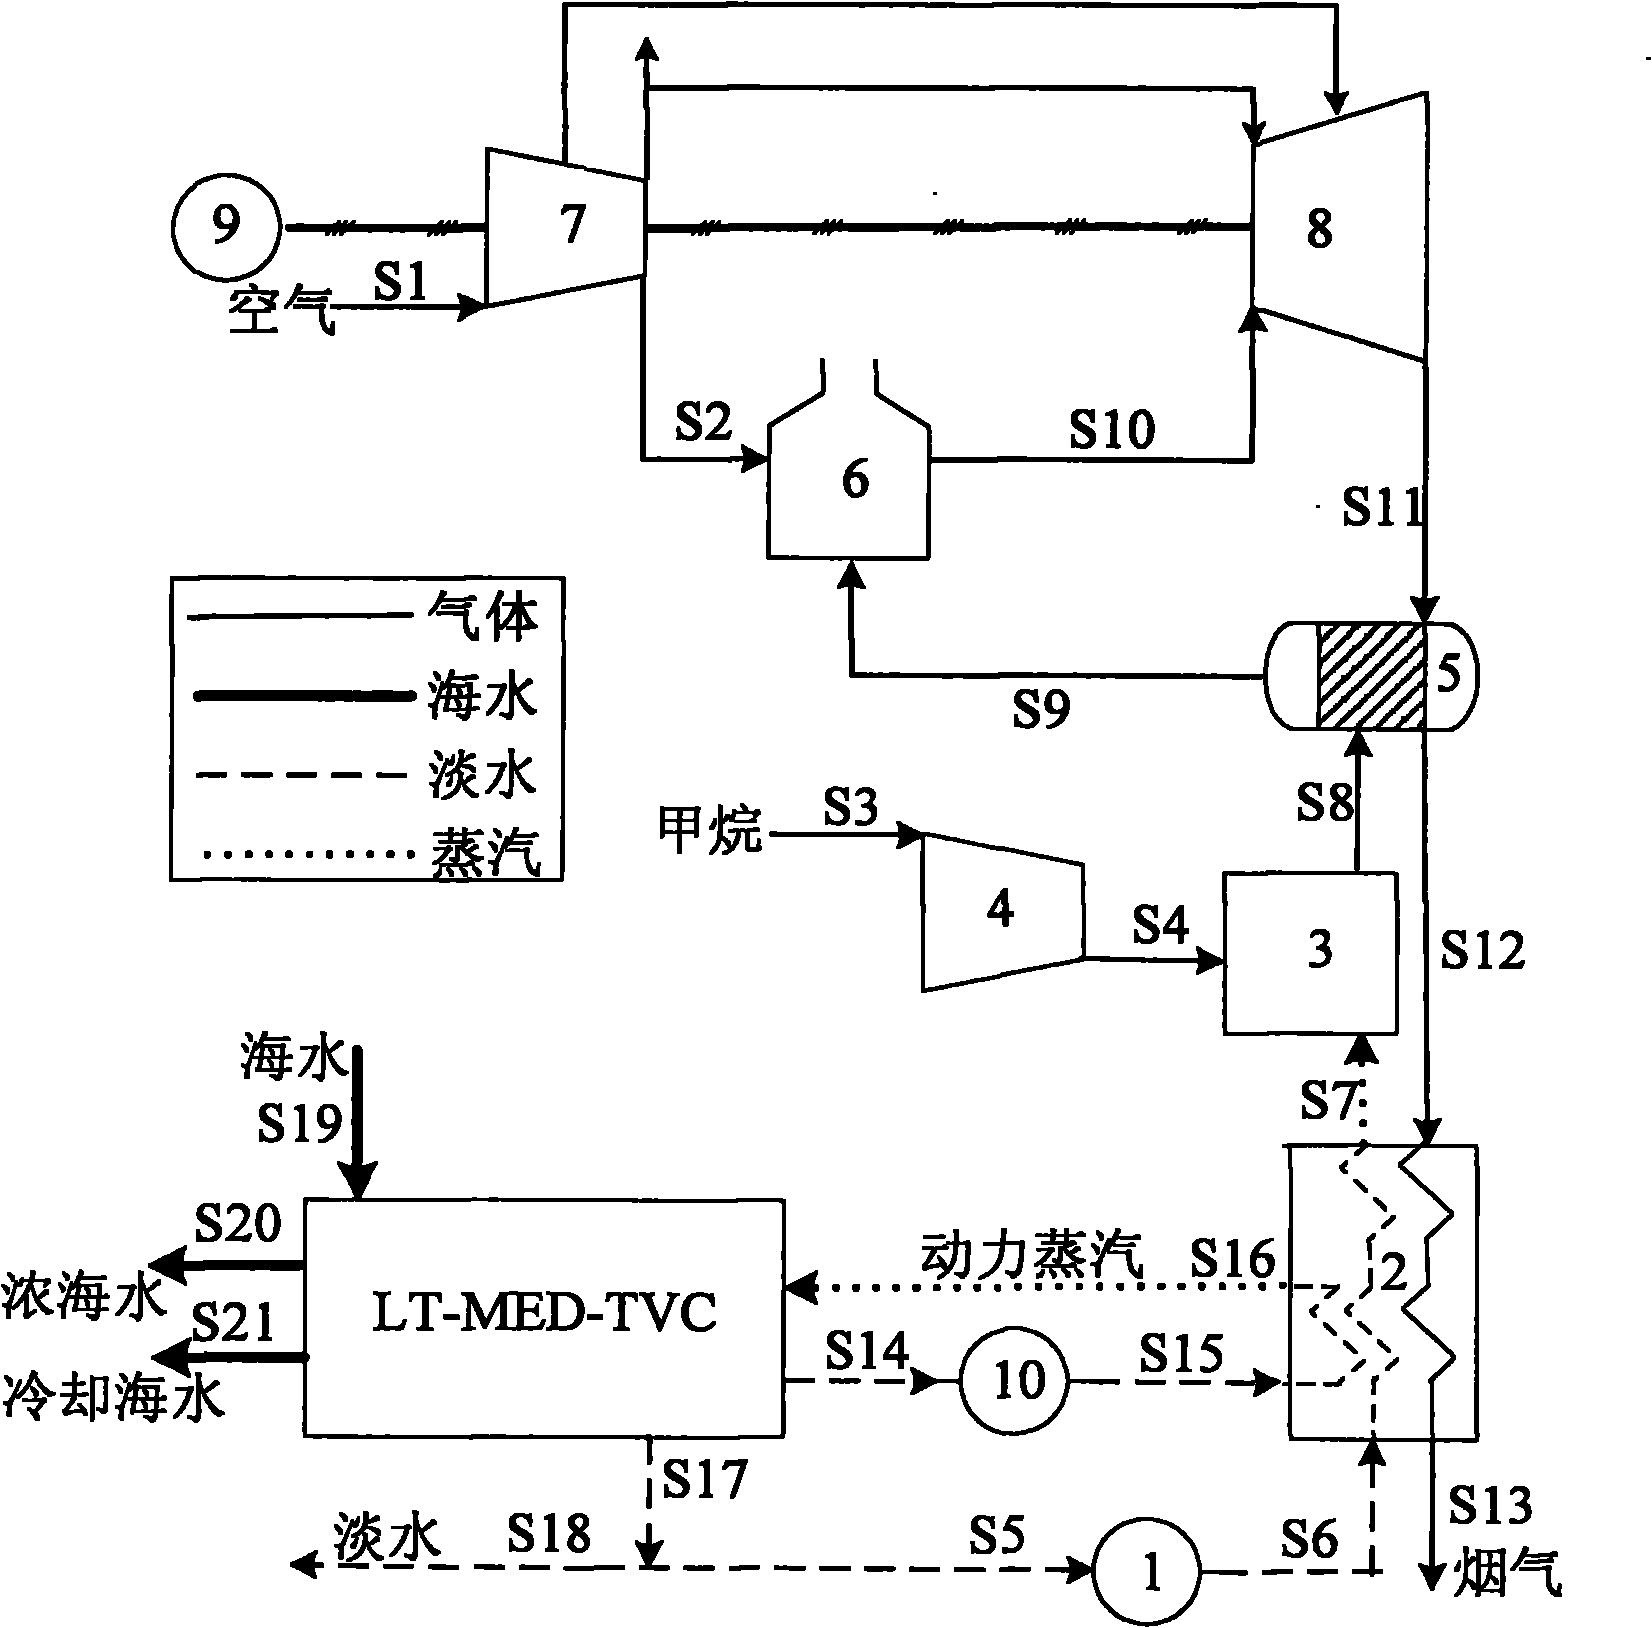 Regenerative cycle and low-temperature multi-effect distillation seawater desalinization thermodynamic cycling device and method